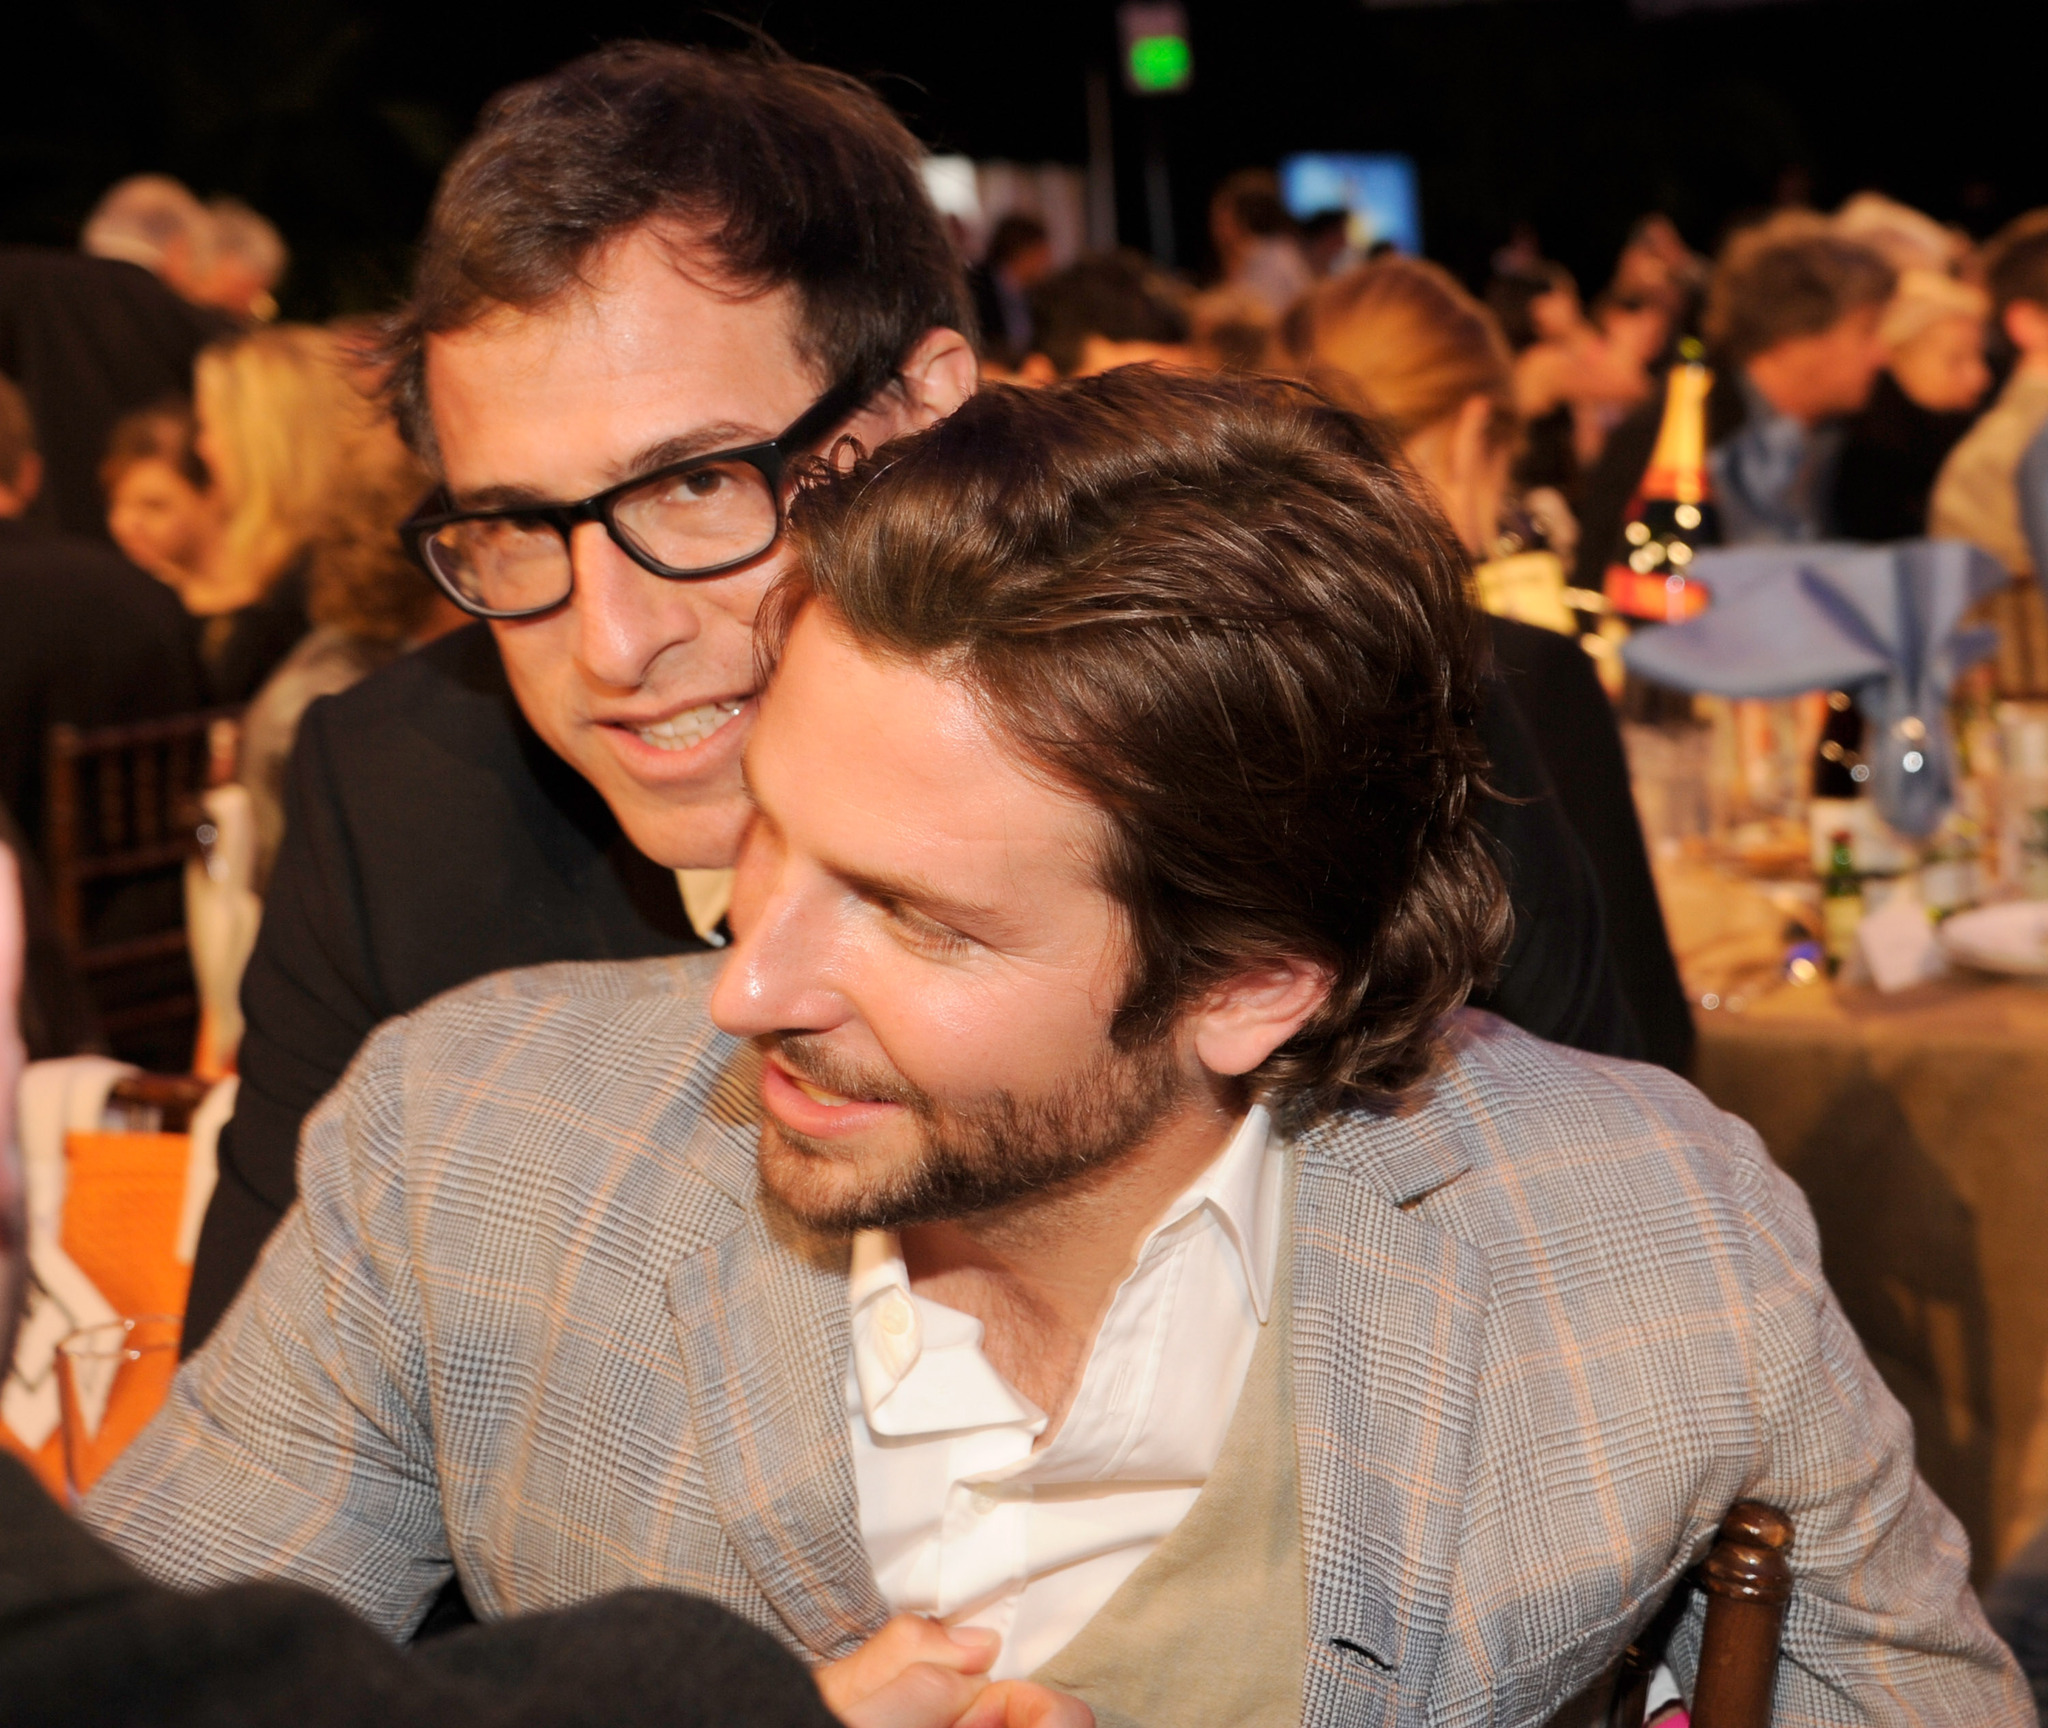 Bradley Cooper and David O. Russell